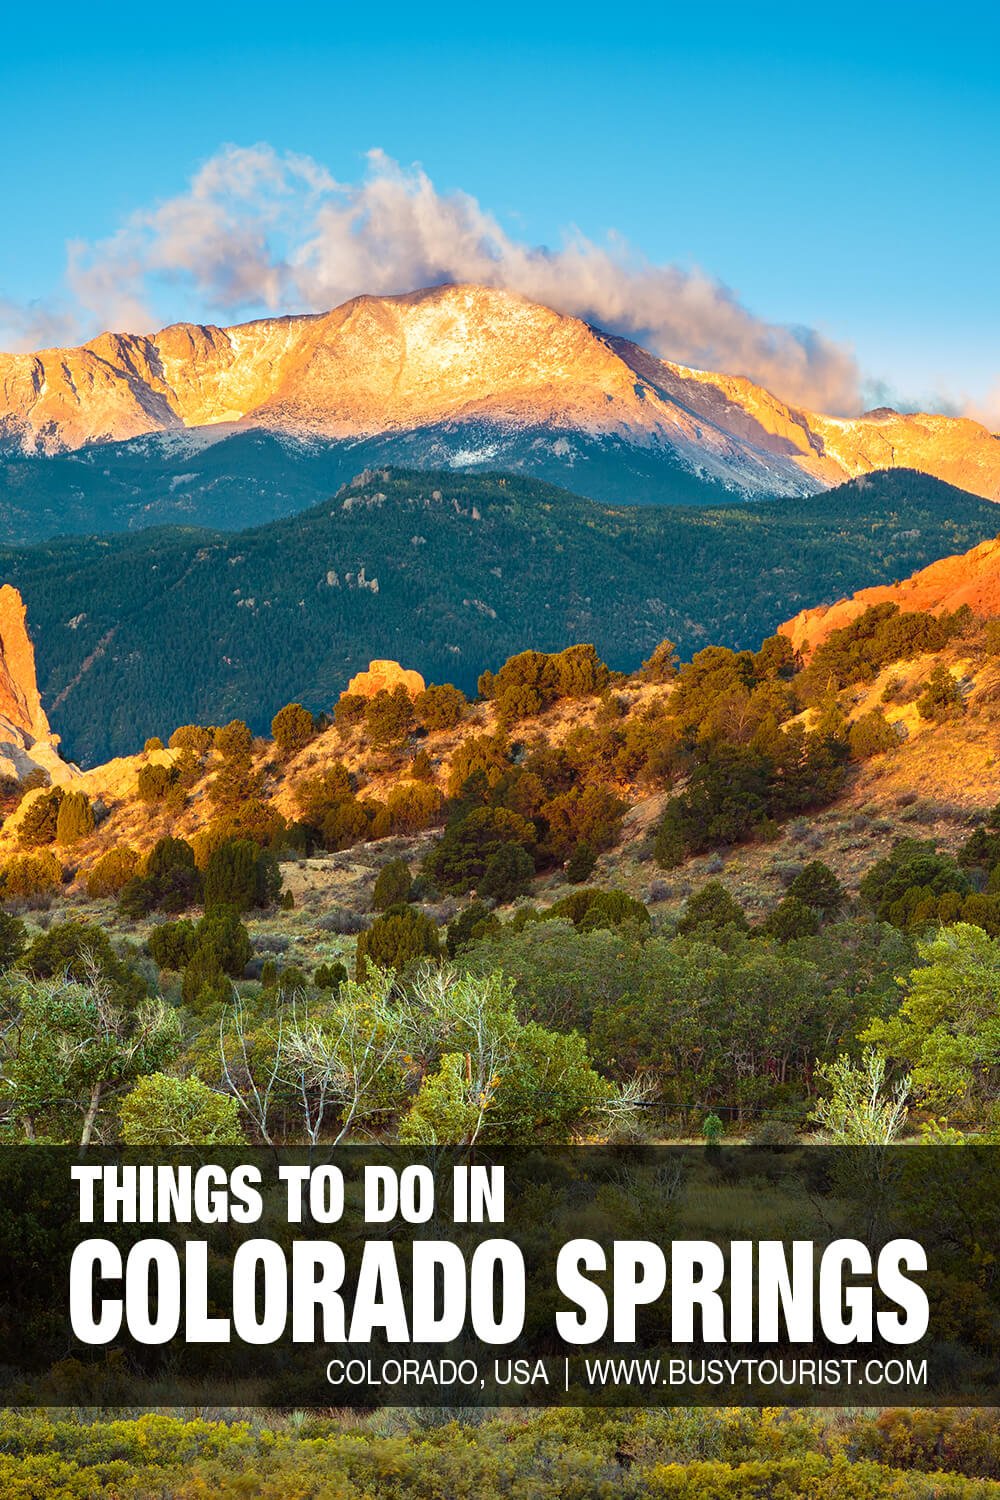 27 Fun Things To Do In Colorado Springs (CO) - Attractions & Activities